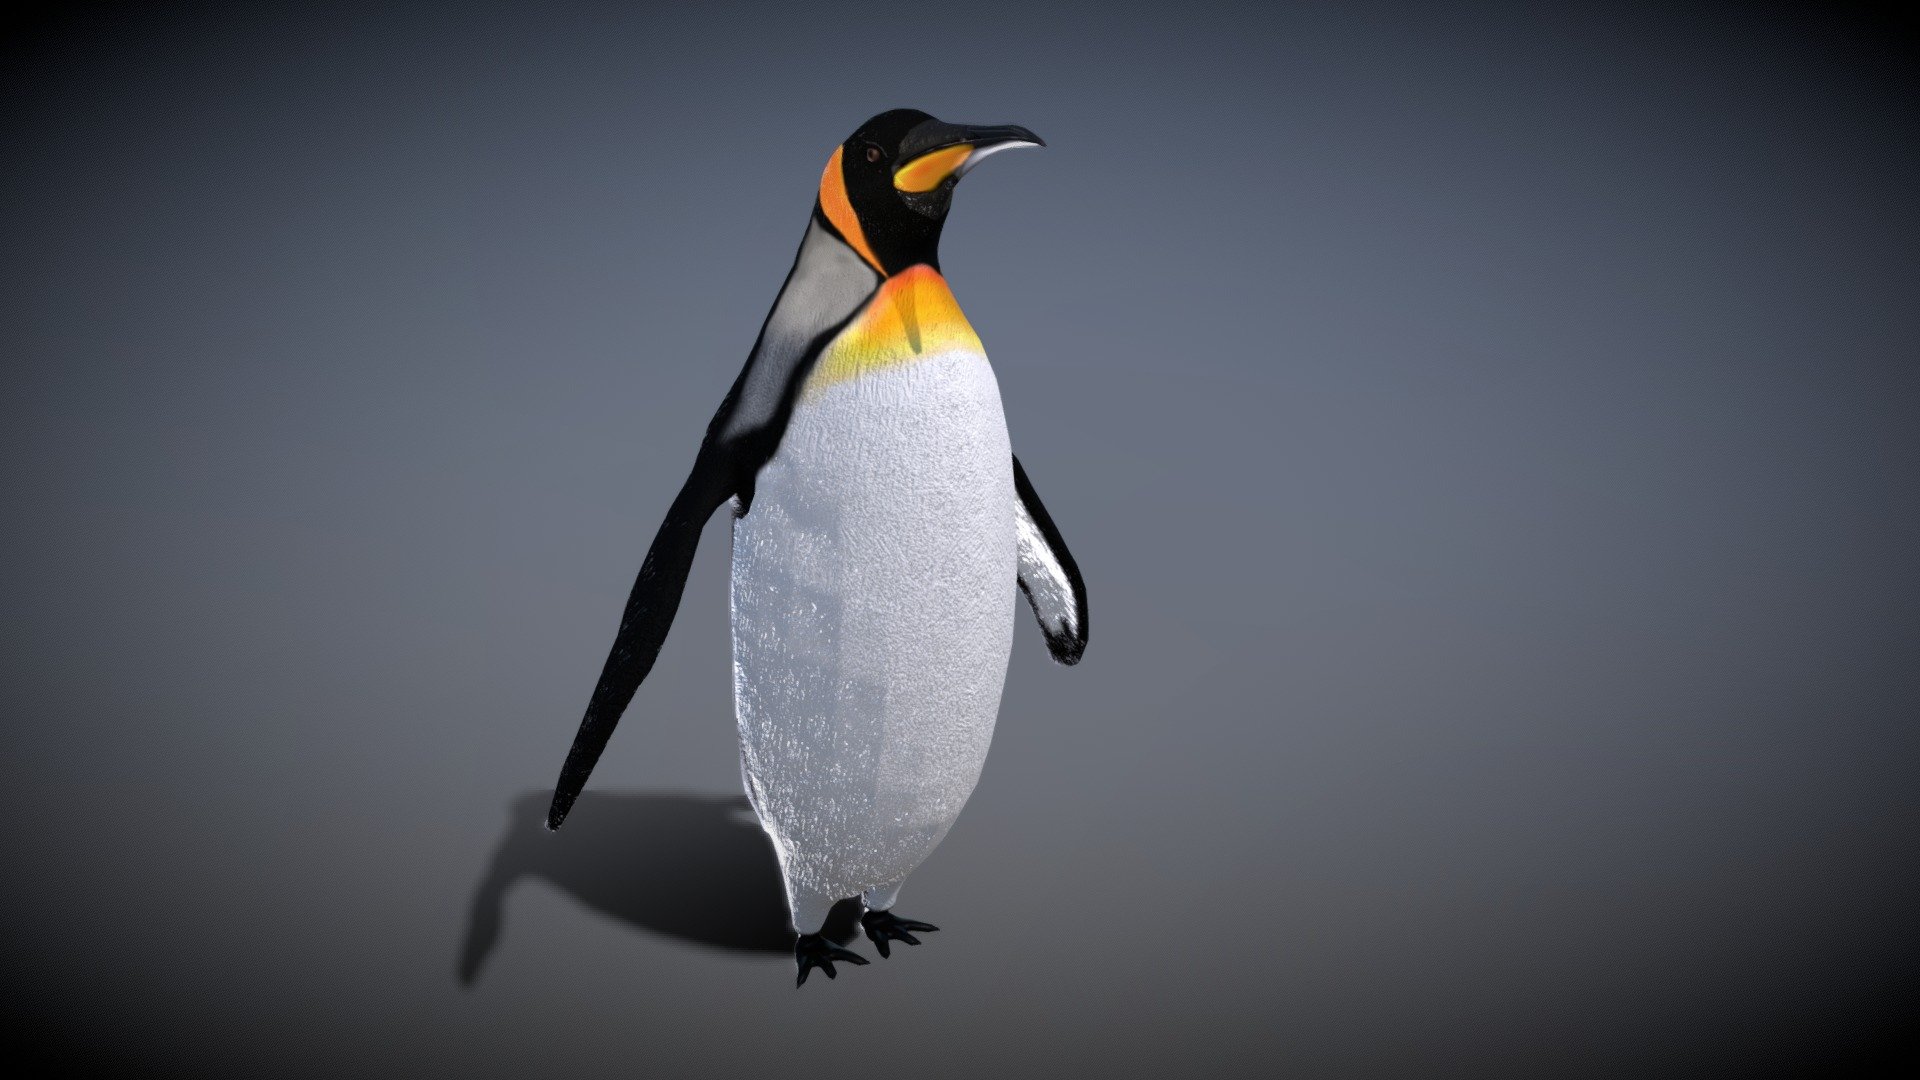 3d low-poly model
made in Blender 2.81
rigged and animated with metarig bird
particle system hair for fuir in Blend file
2048/2048 PBR textures - Emperor Penguin - Buy Royalty Free 3D model by pinotoon 3d model